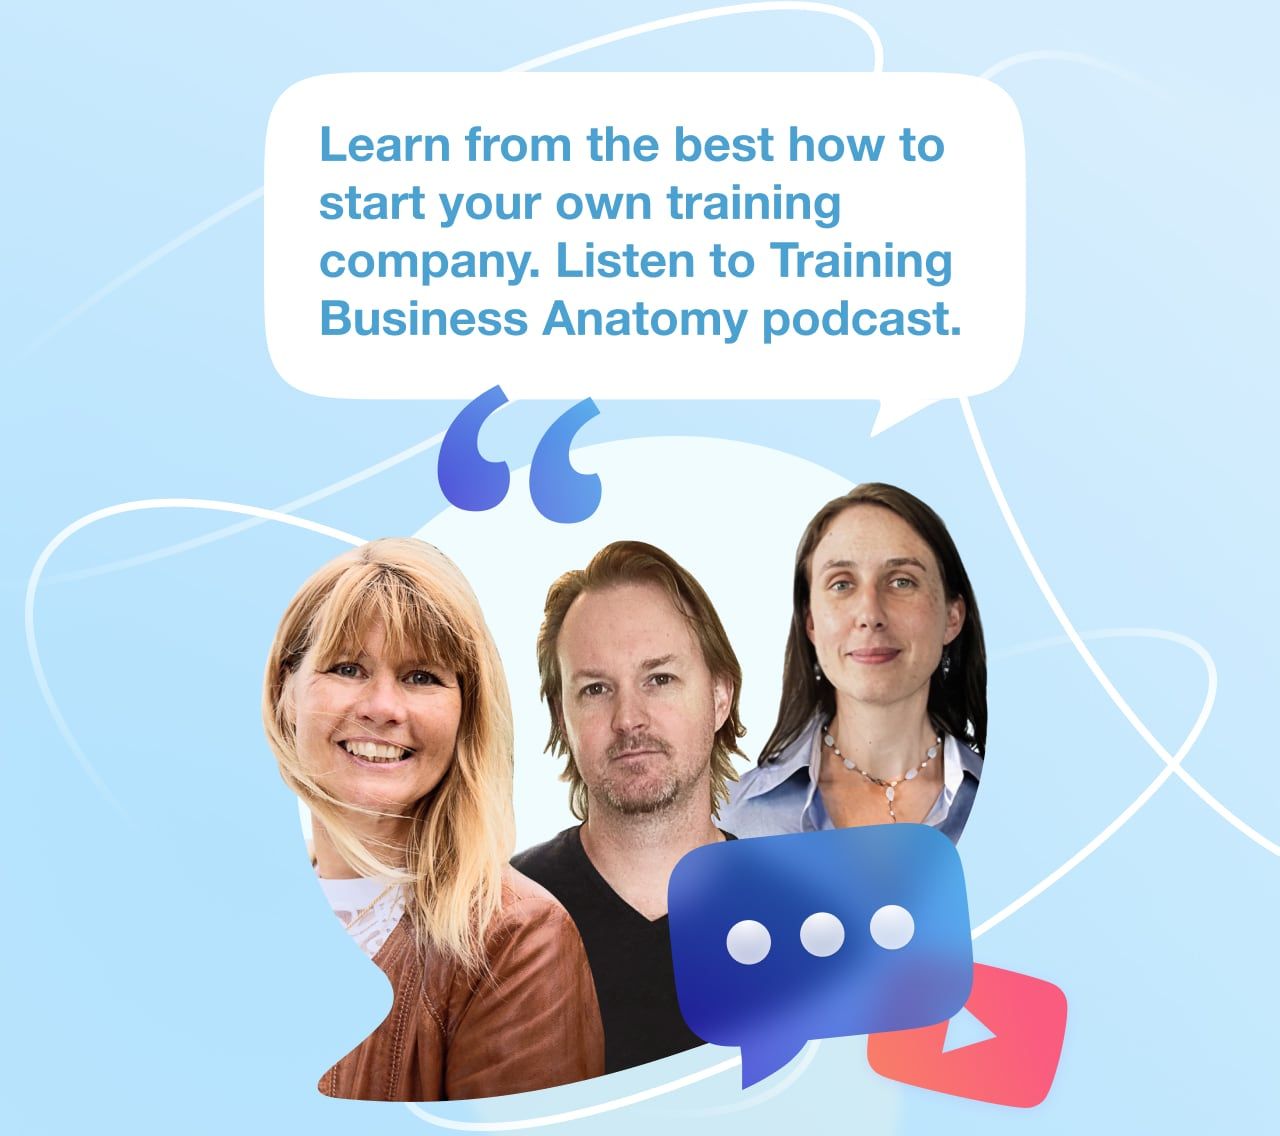 Launch of Training Business Anatomy podcast